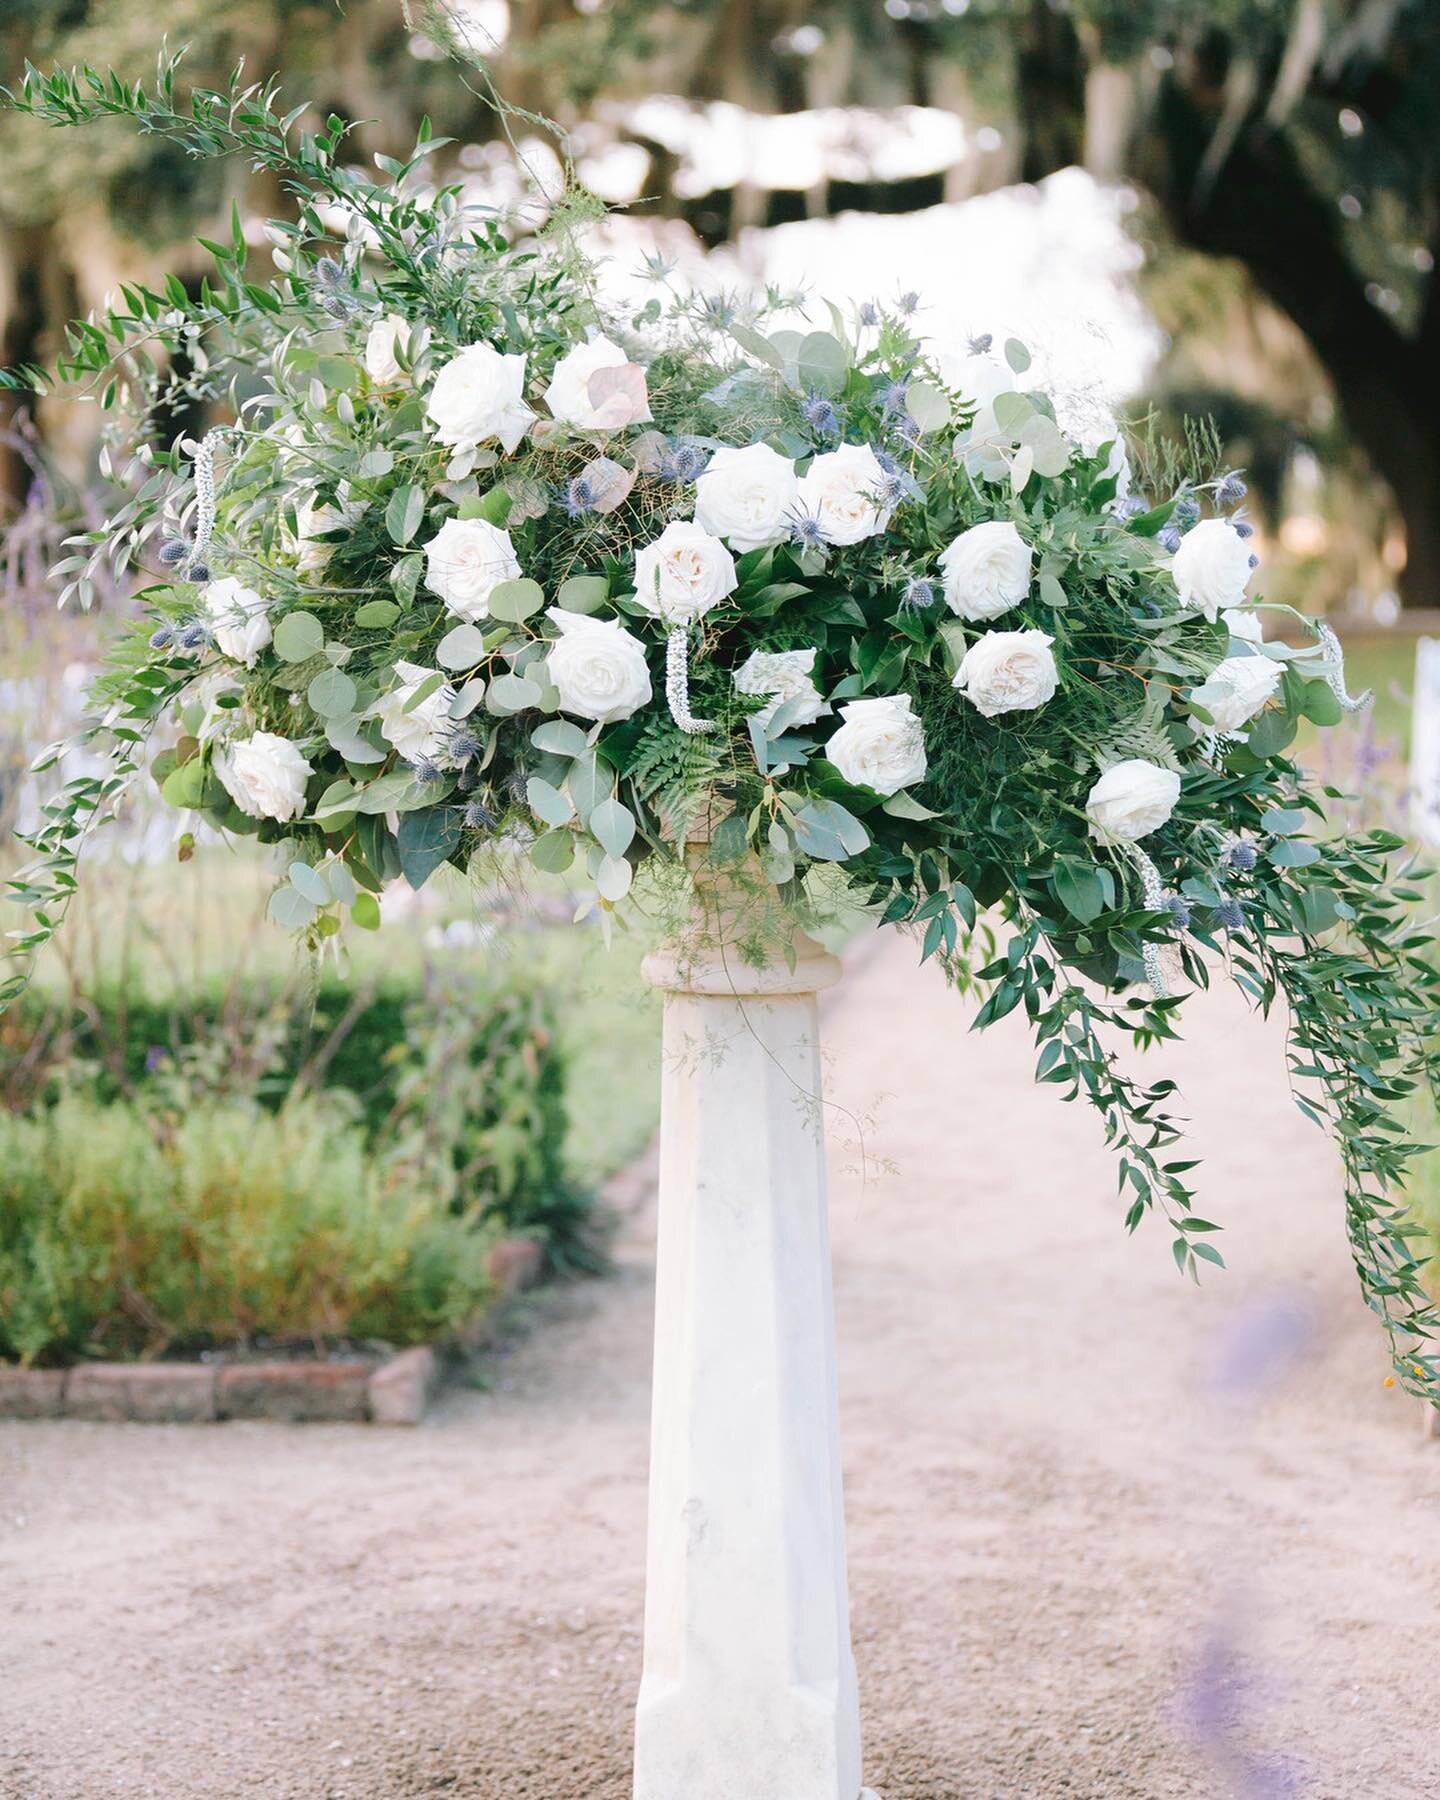 Sitting over here wishing that Instagram had a scratch + sniff feature...
⠀⠀⠀⠀⠀⠀⠀⠀⠀
Photography: @katetimbers
Venue: @middletonplace
Planner @cruzcoordination
Floral: Charleston Wedding Studio
⠀⠀⠀⠀⠀⠀⠀⠀⠀
#charlestonwedding #charlestonweddingstudio #mi